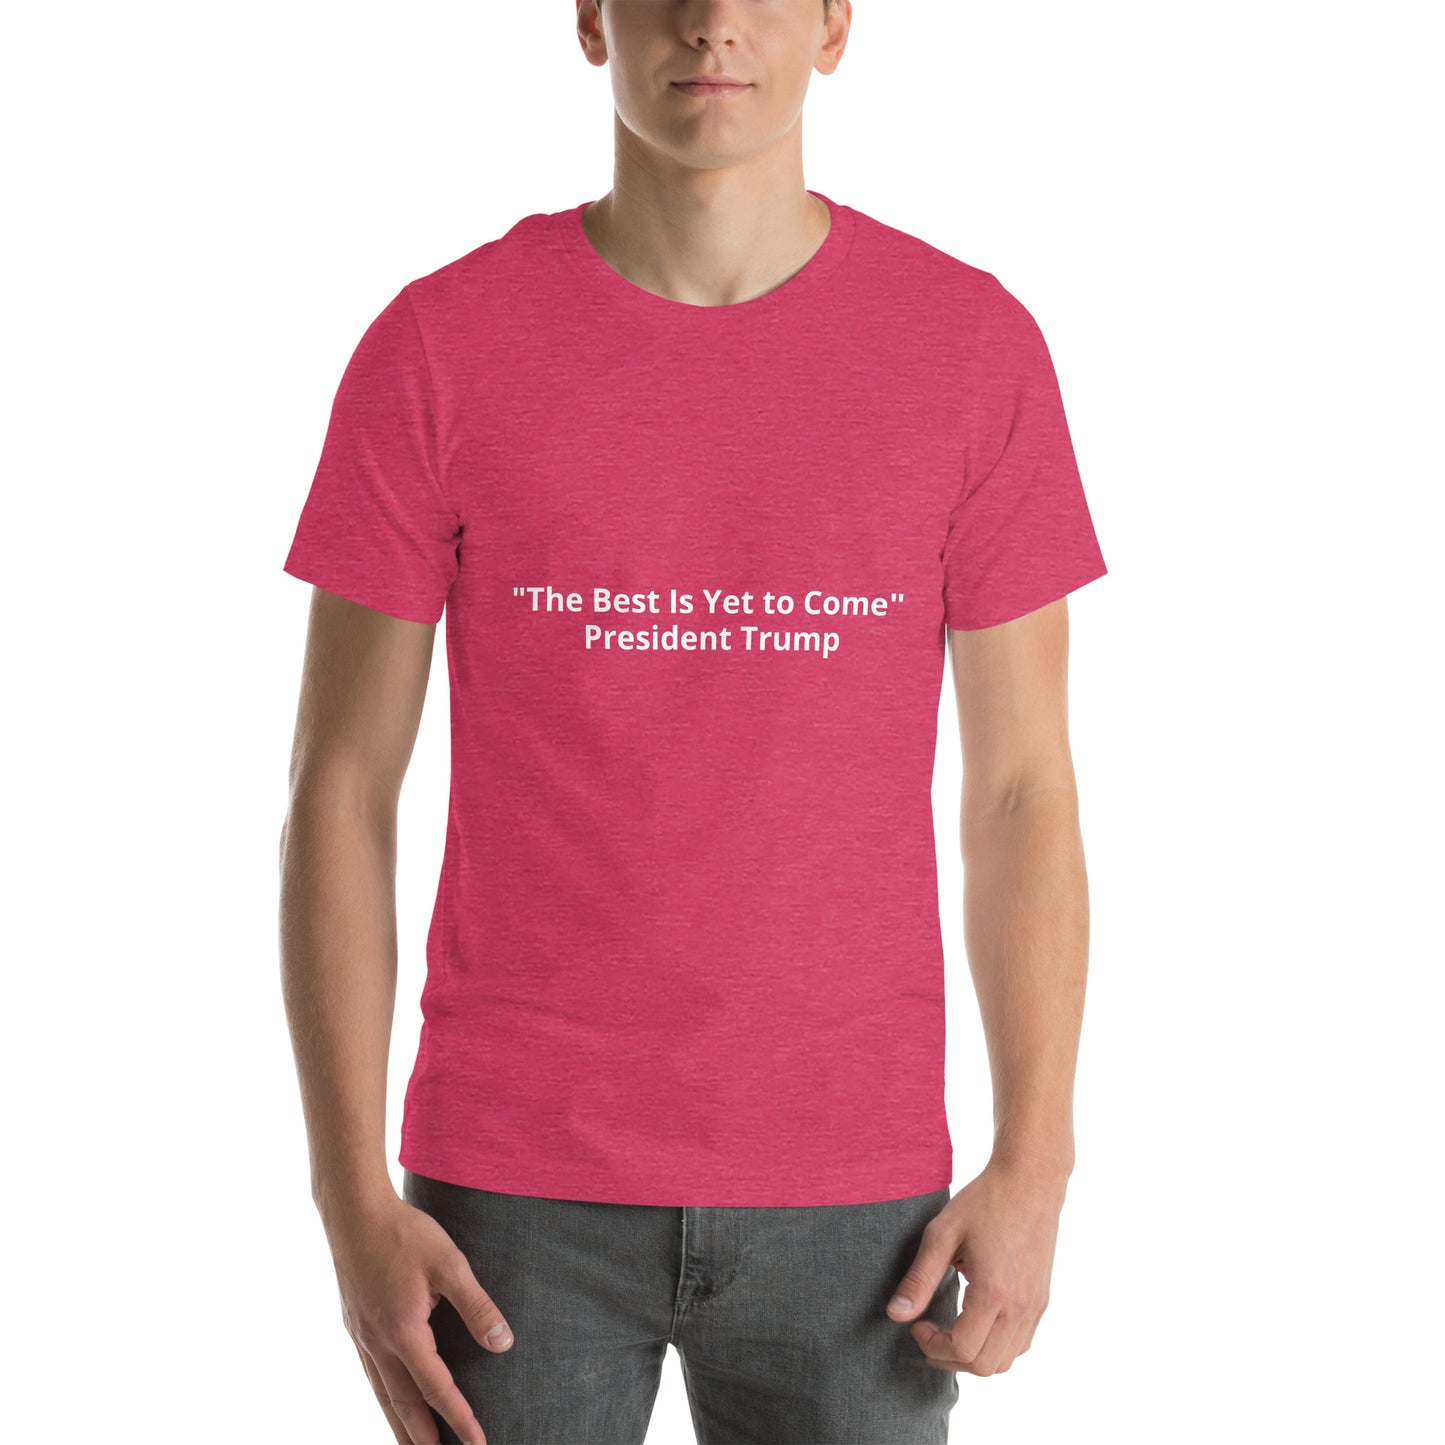 "The Best Is Yet to Come" President Trump  Unisex t-shirt